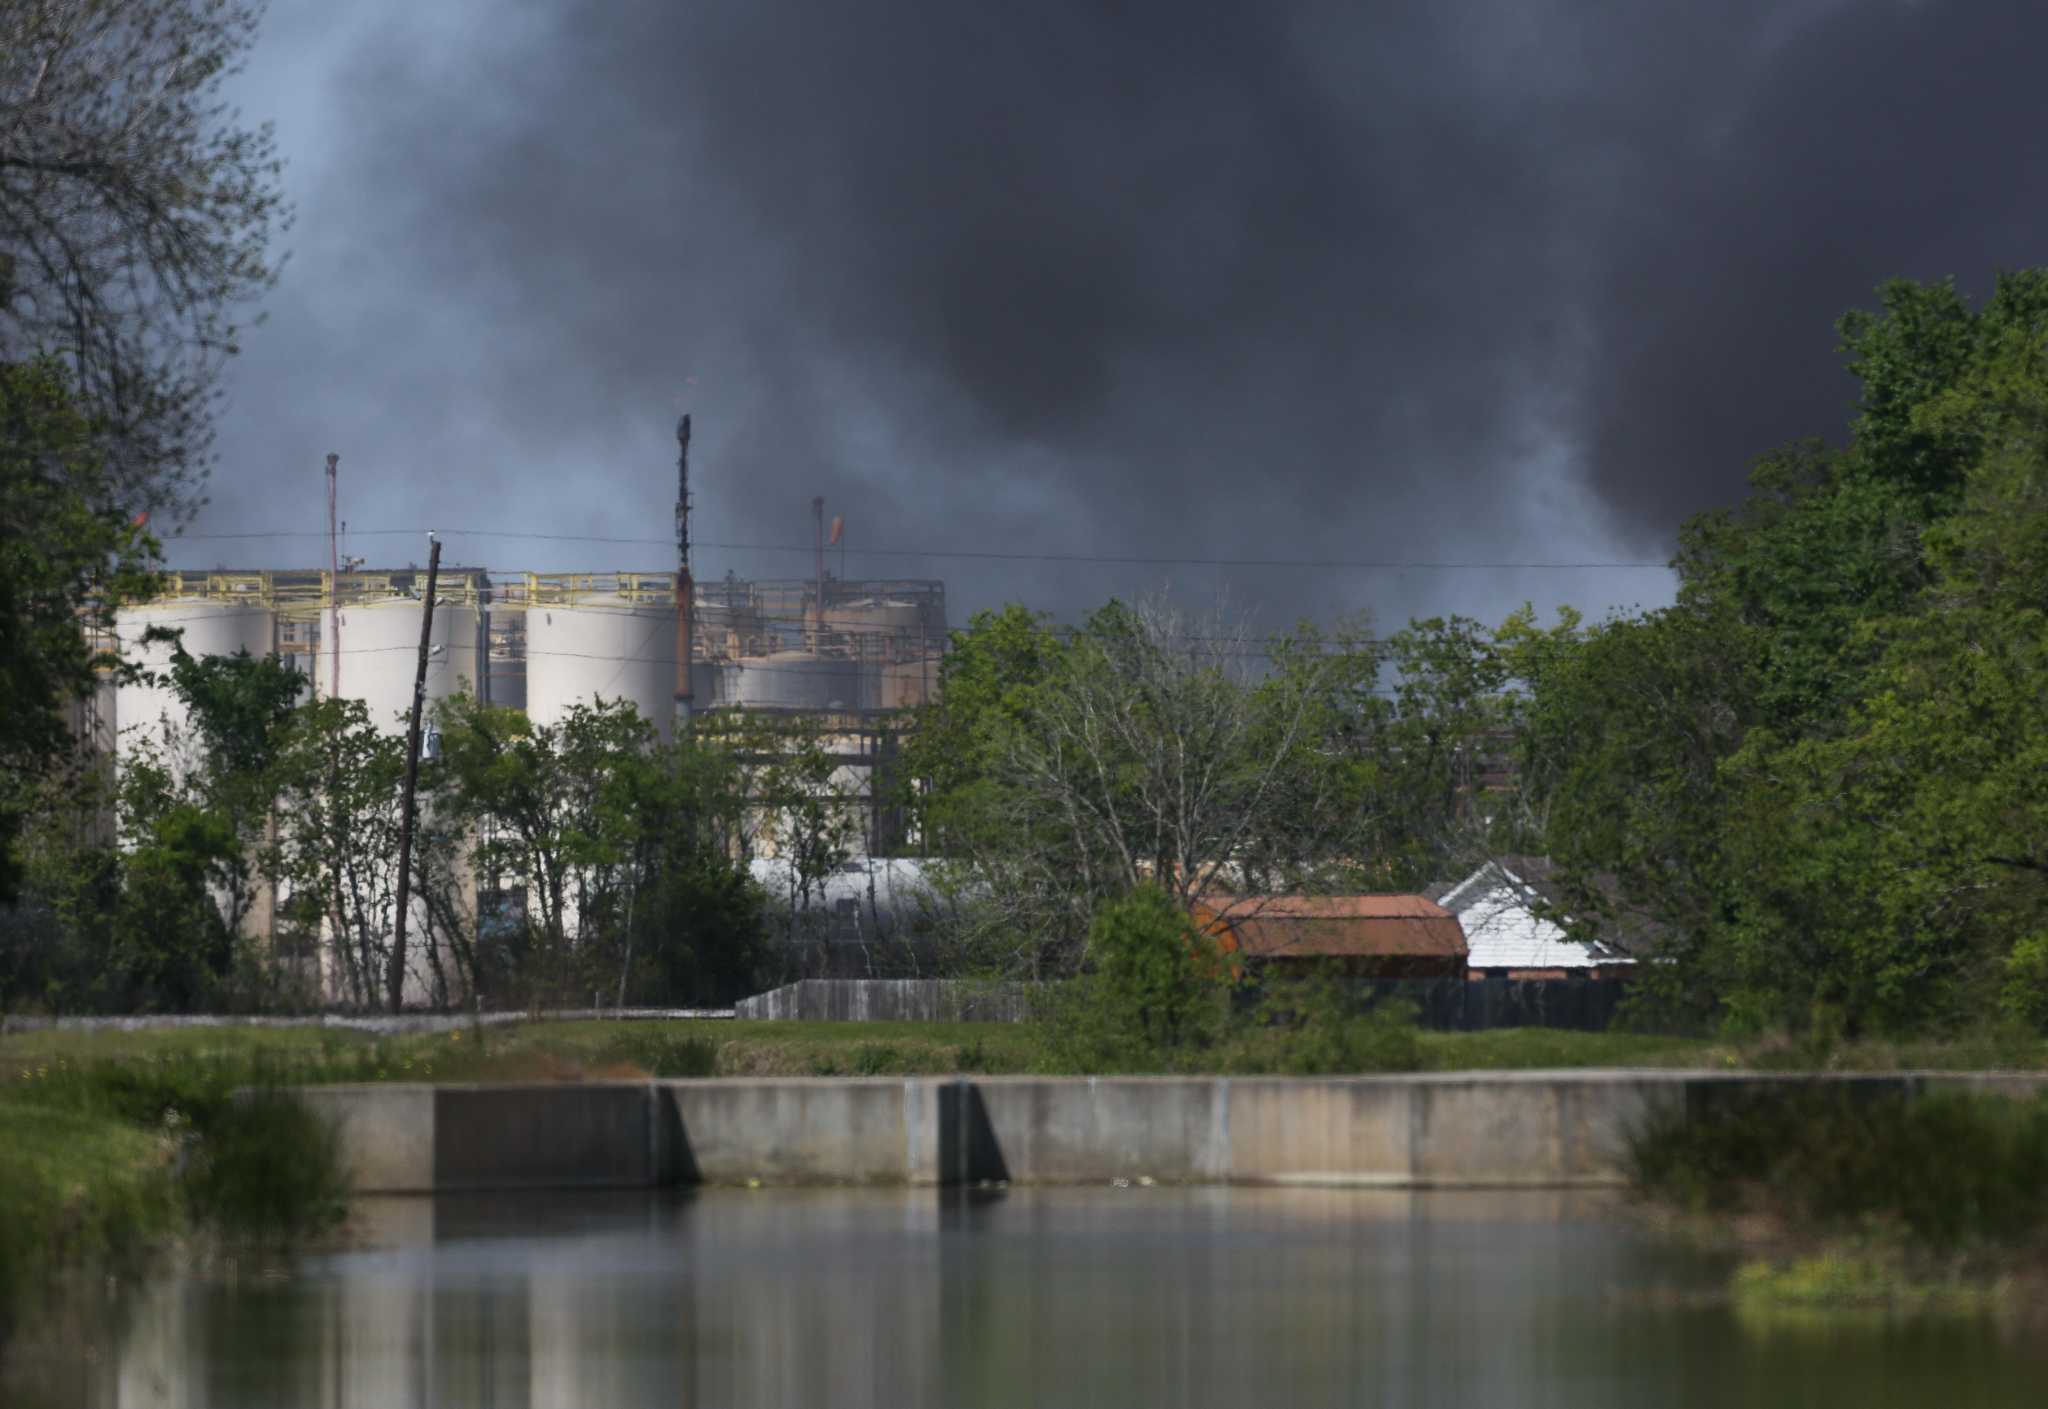 Lawsuit: KMCO officials aware of valve leak before chemical plant explosion - Houston ...2048 x 1409